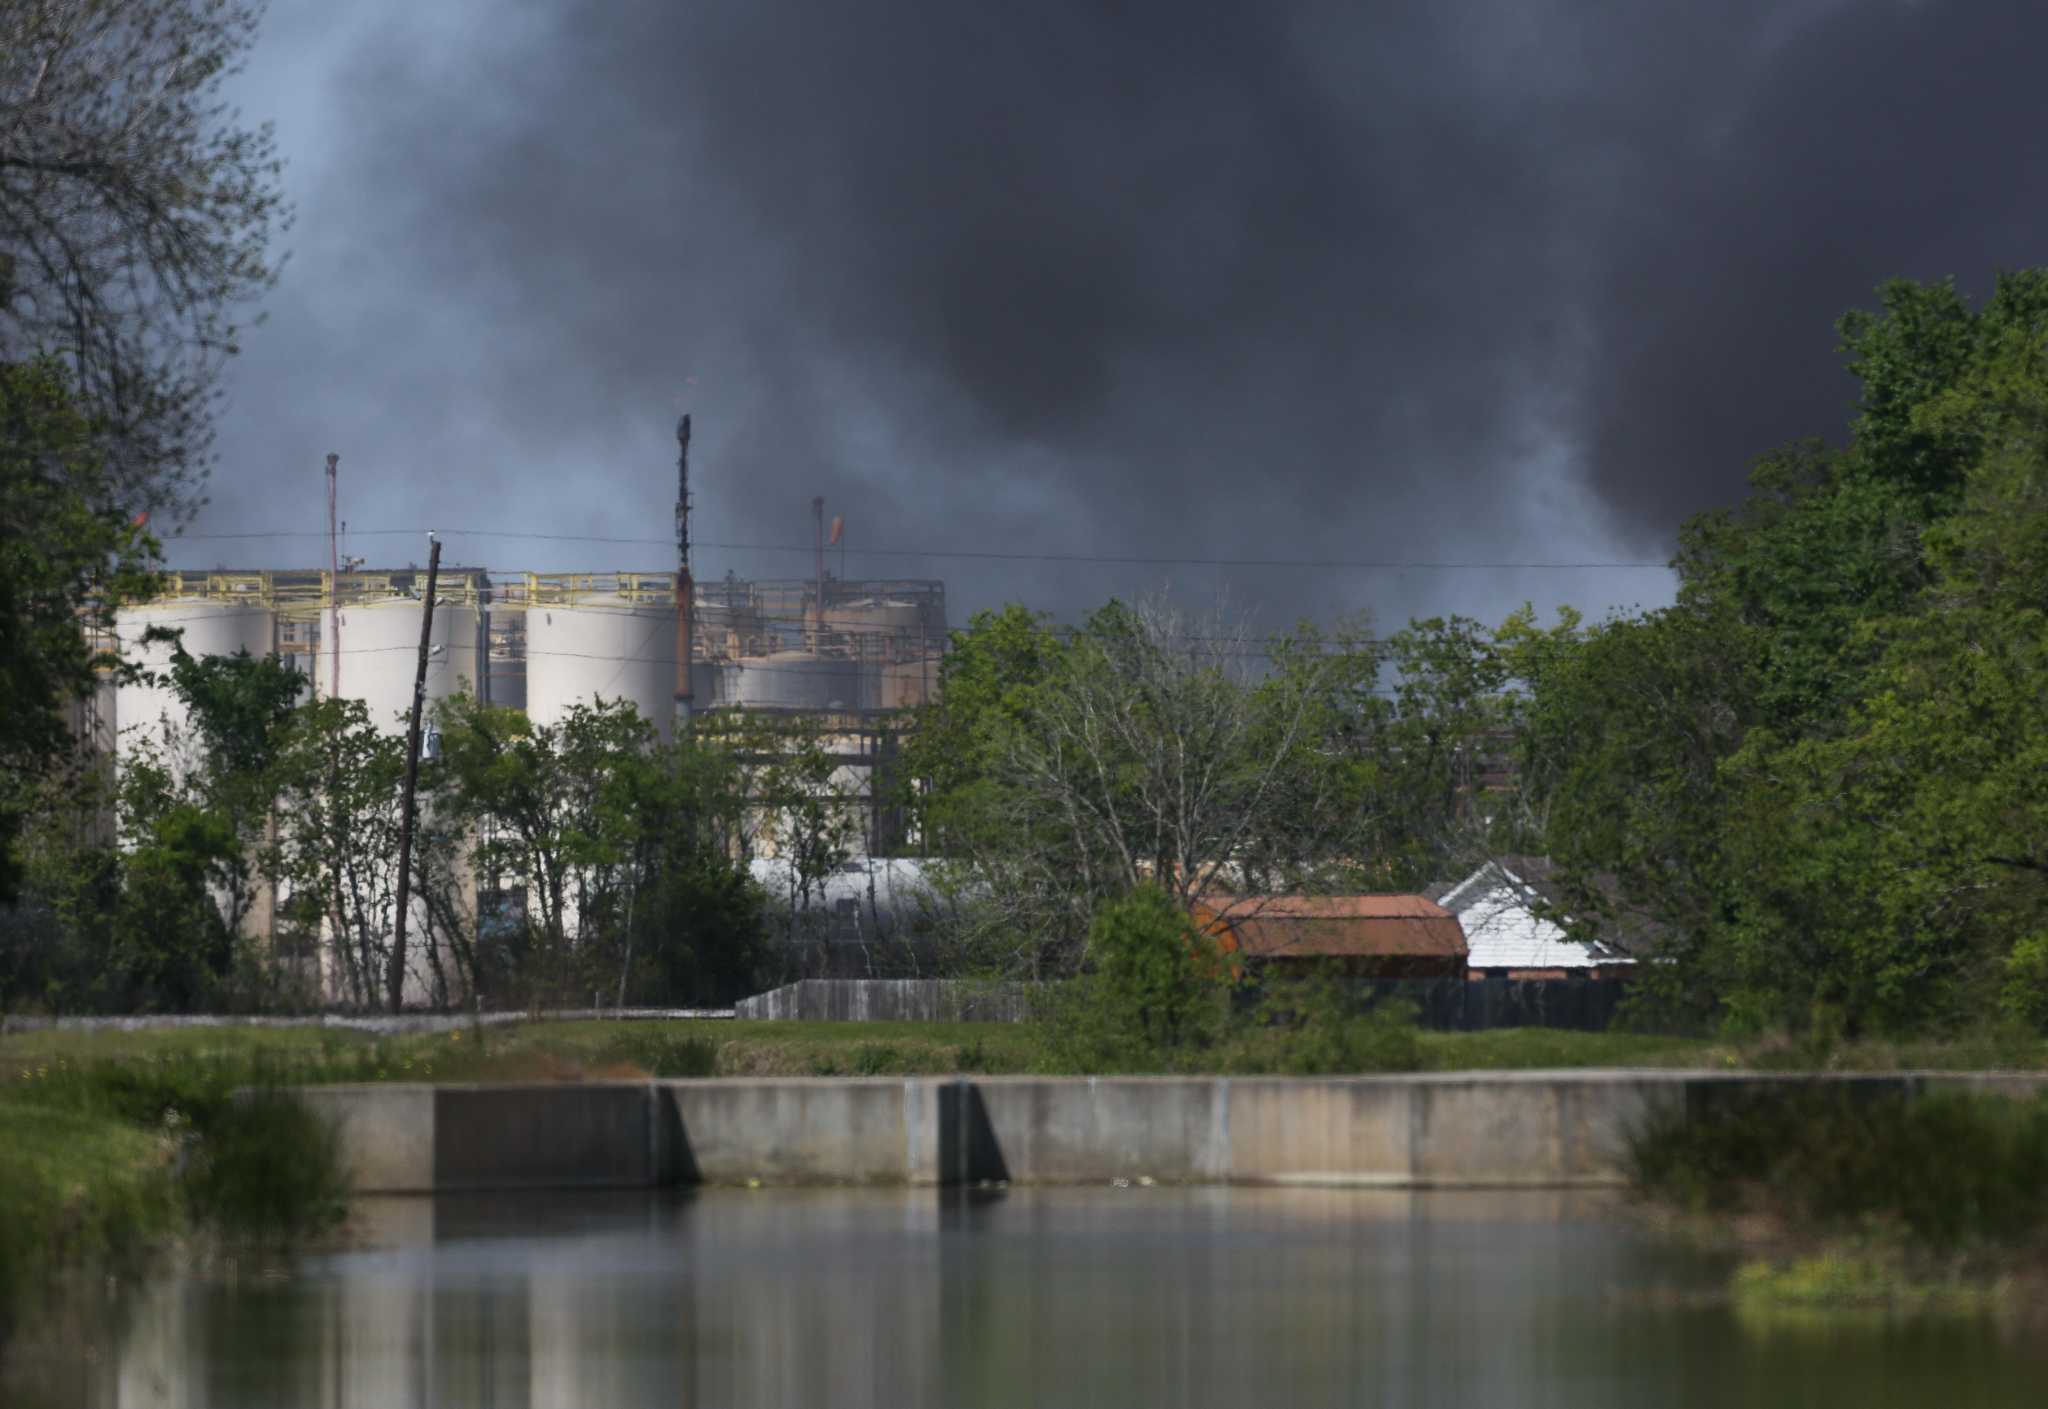 Lawsuit: KMCO officials aware of valve leak before chemical plant explosion - Houston ...2048 x 1409